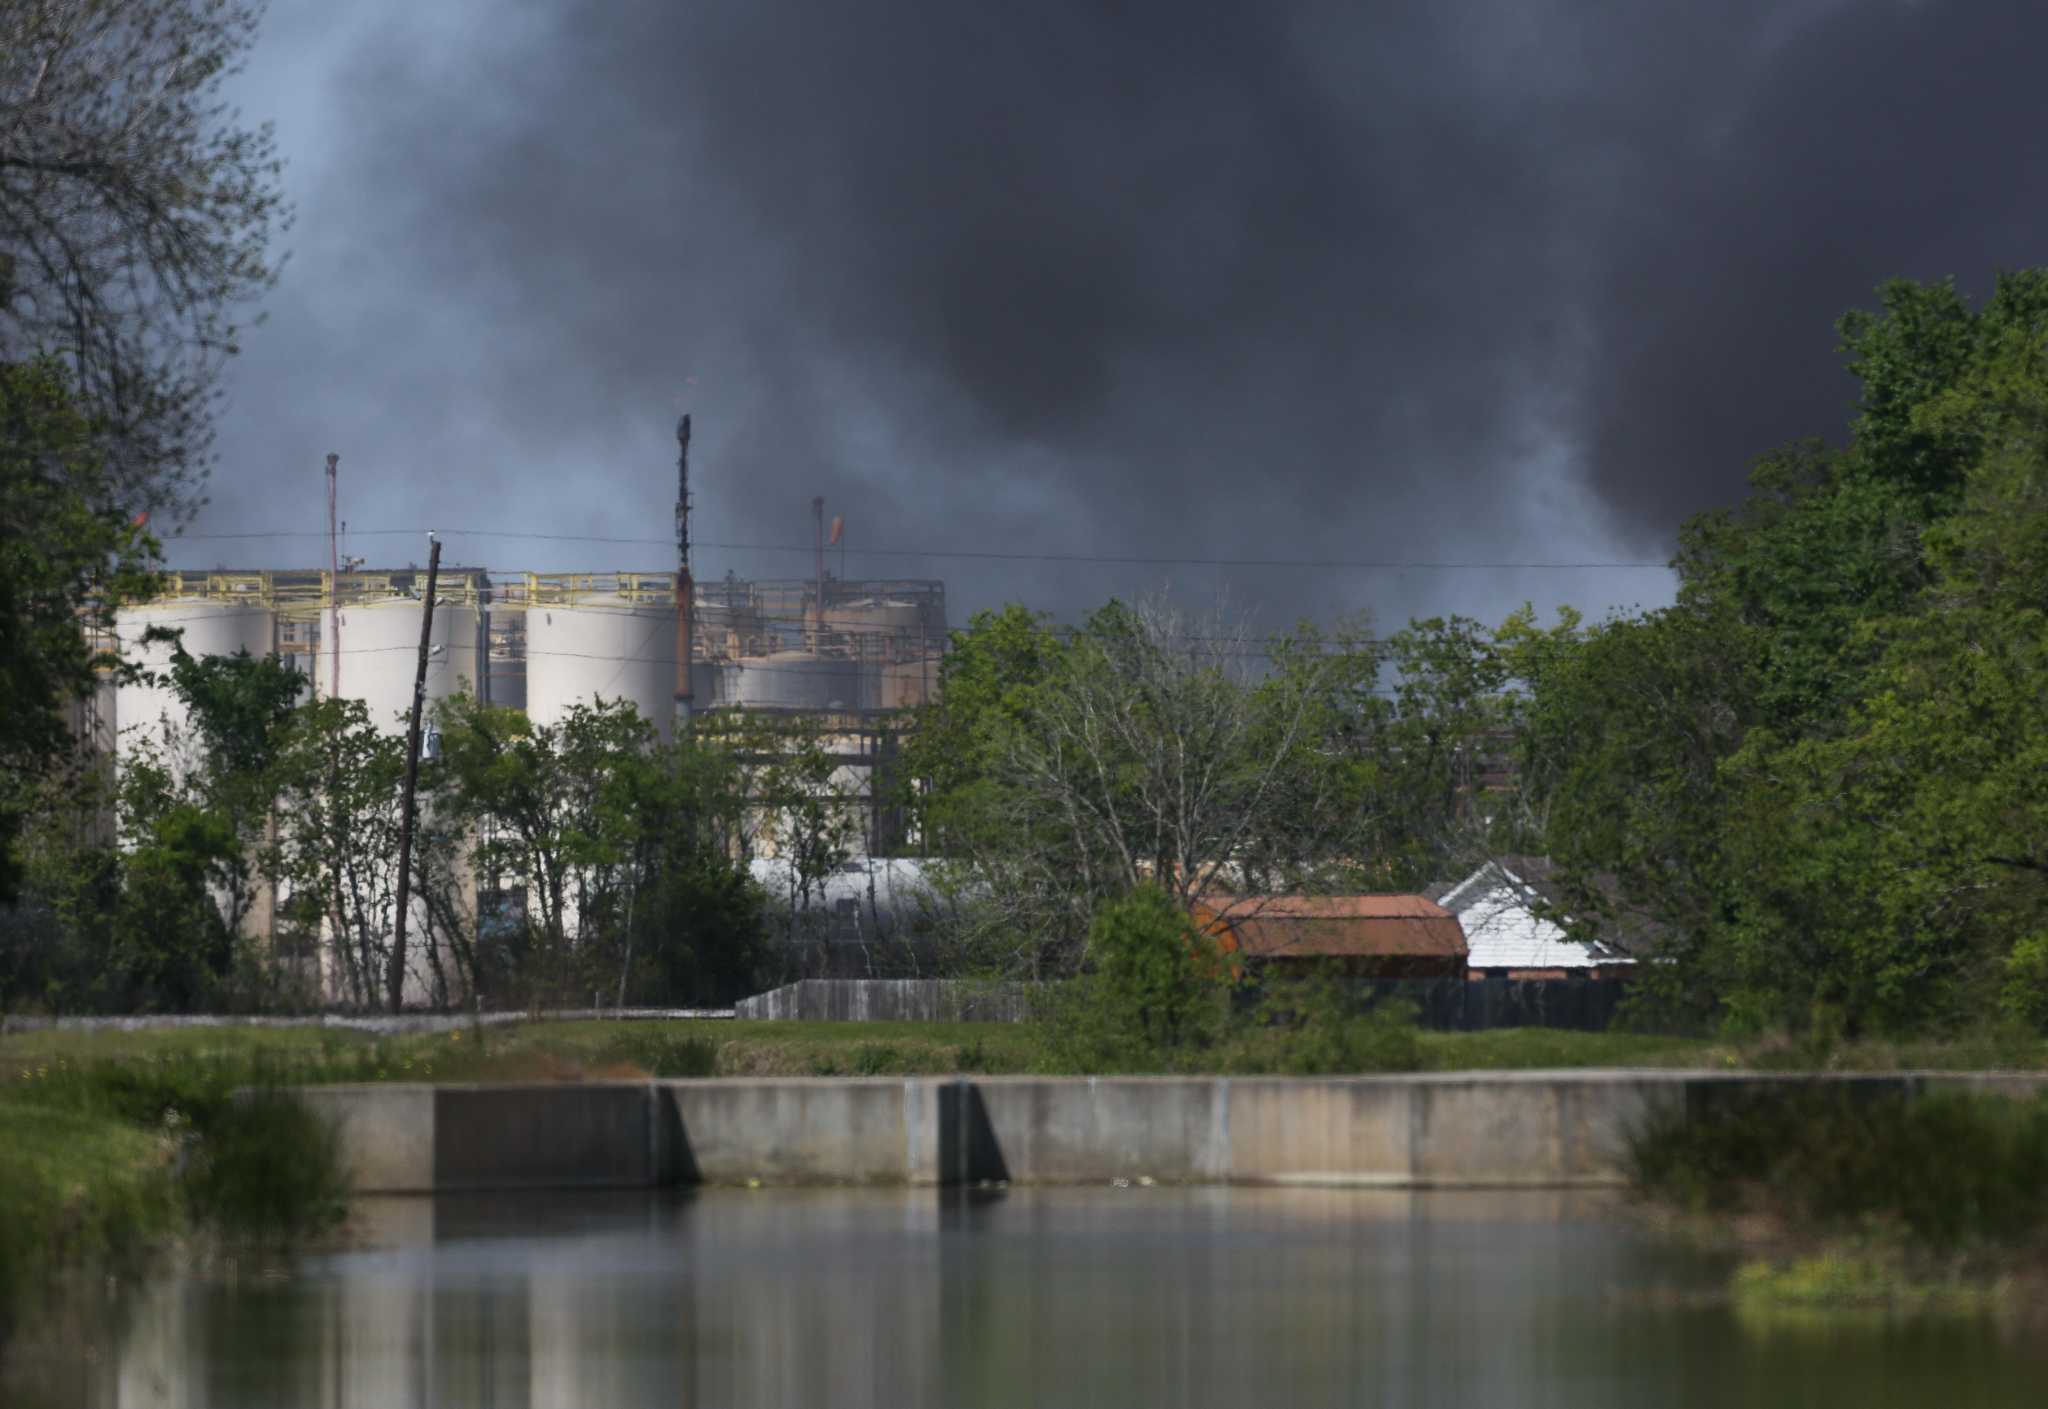 Lawsuit: KMCO officials aware of valve leak before chemical plant explosion - Houston ...2048 x 1409